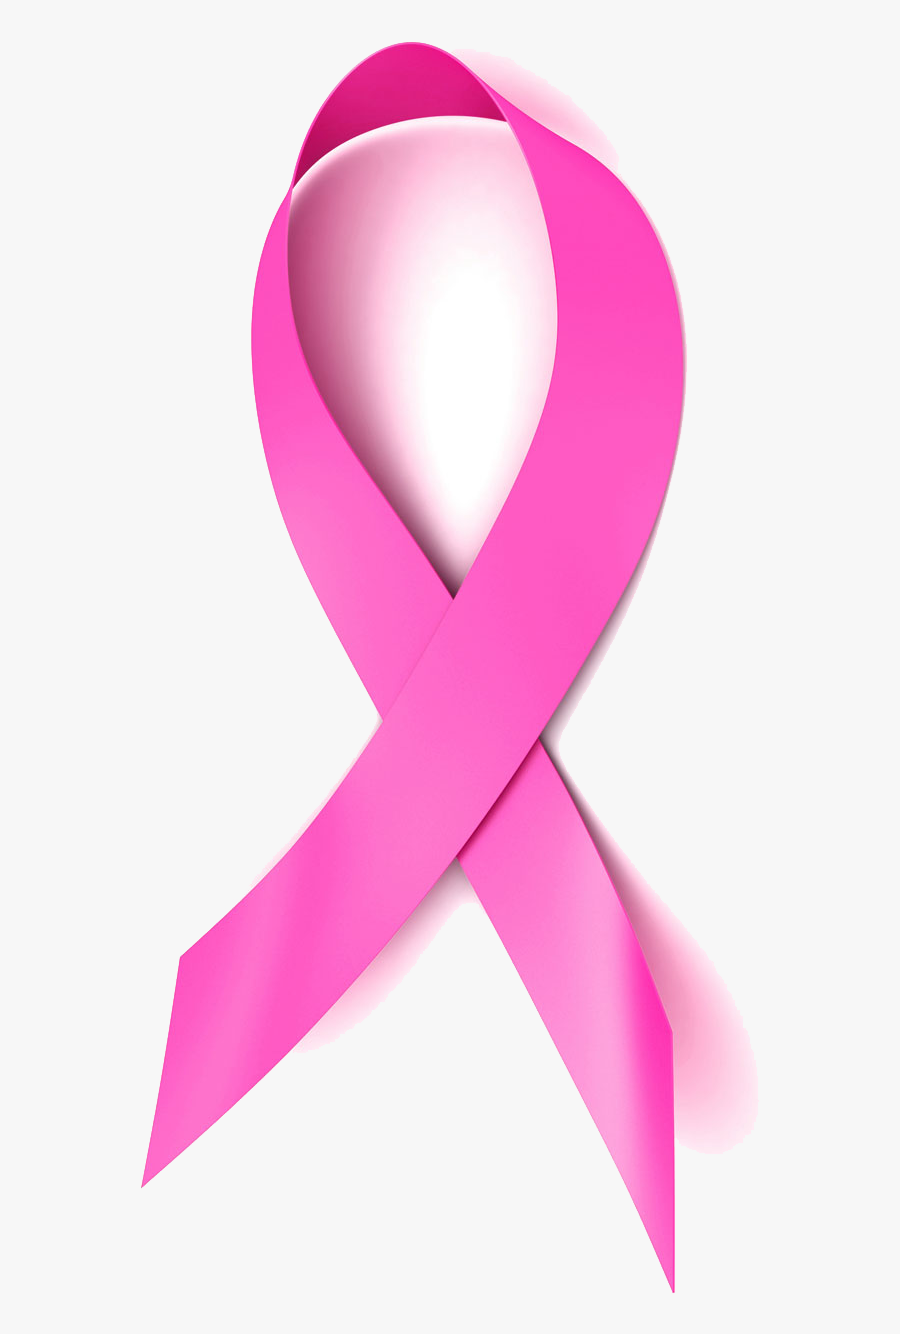 Breast Cancer Ribbon Free Download Png - Breast Cancer Ribbon Transparent, Transparent Clipart